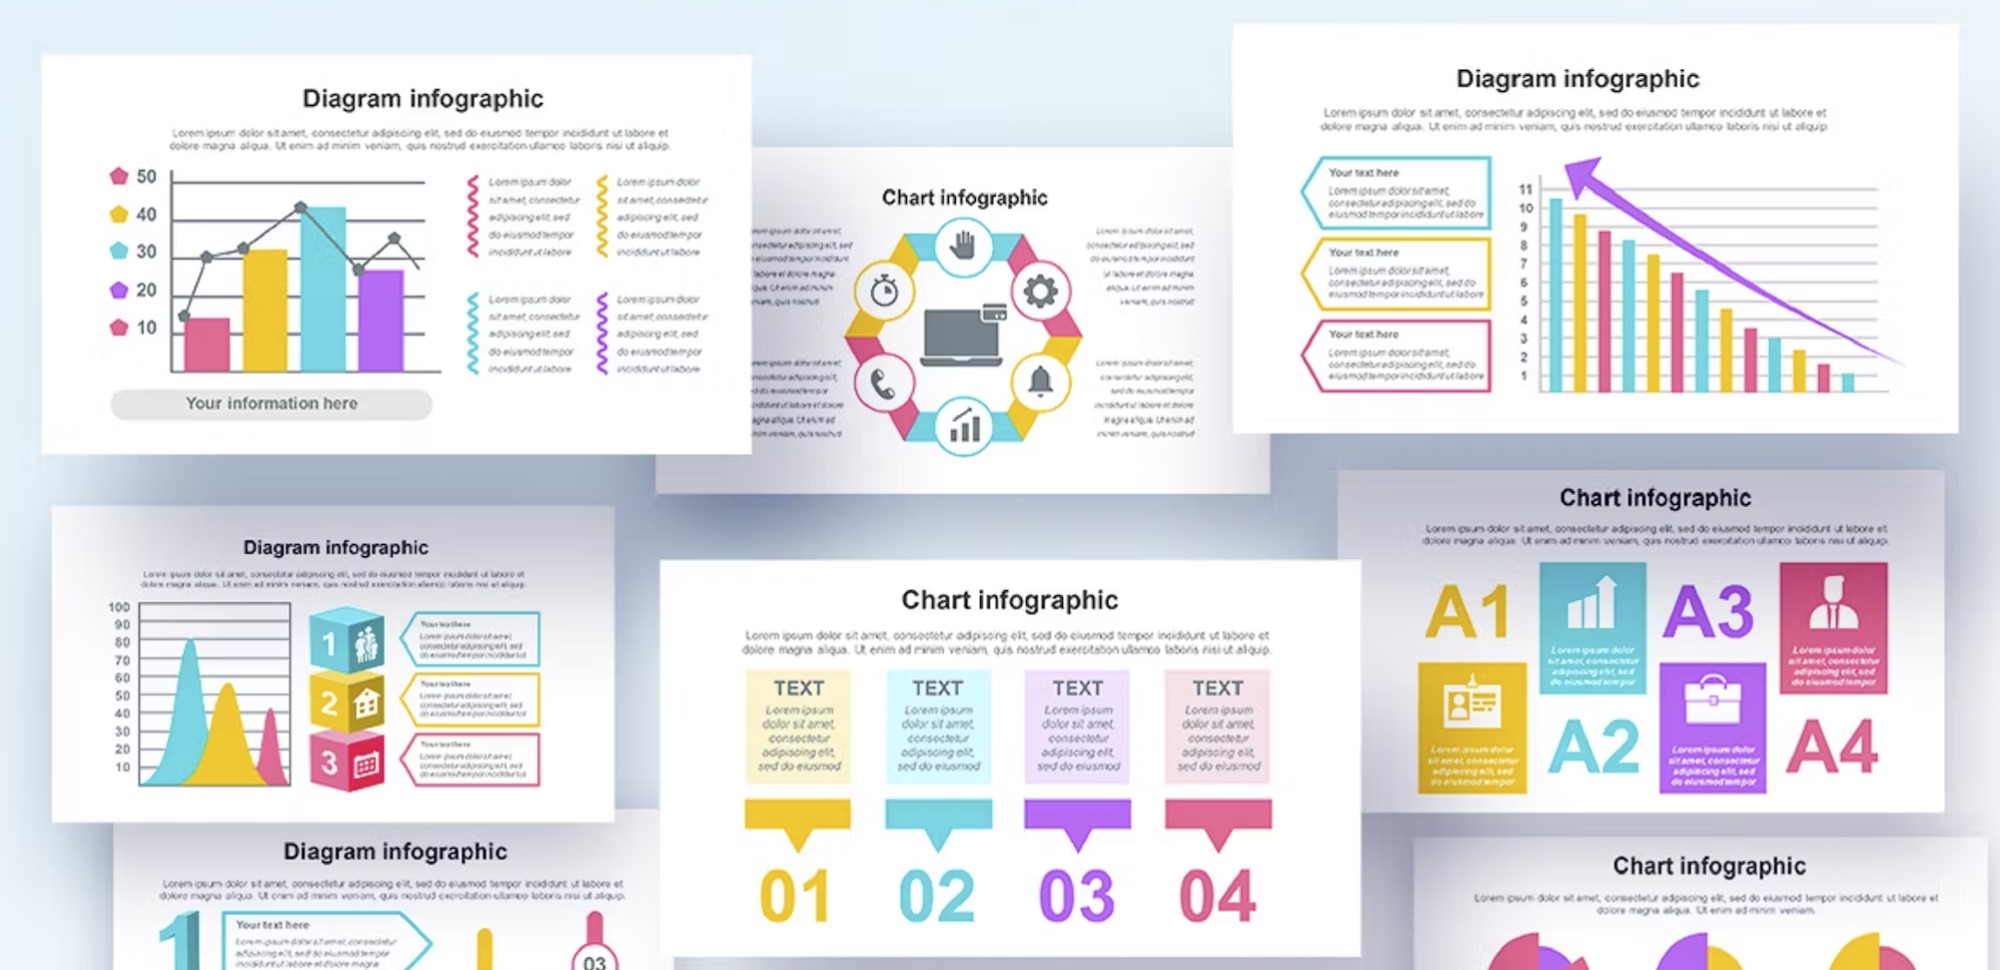 Tips for Creating Infographics: Provide guidance on how to create effective infographics